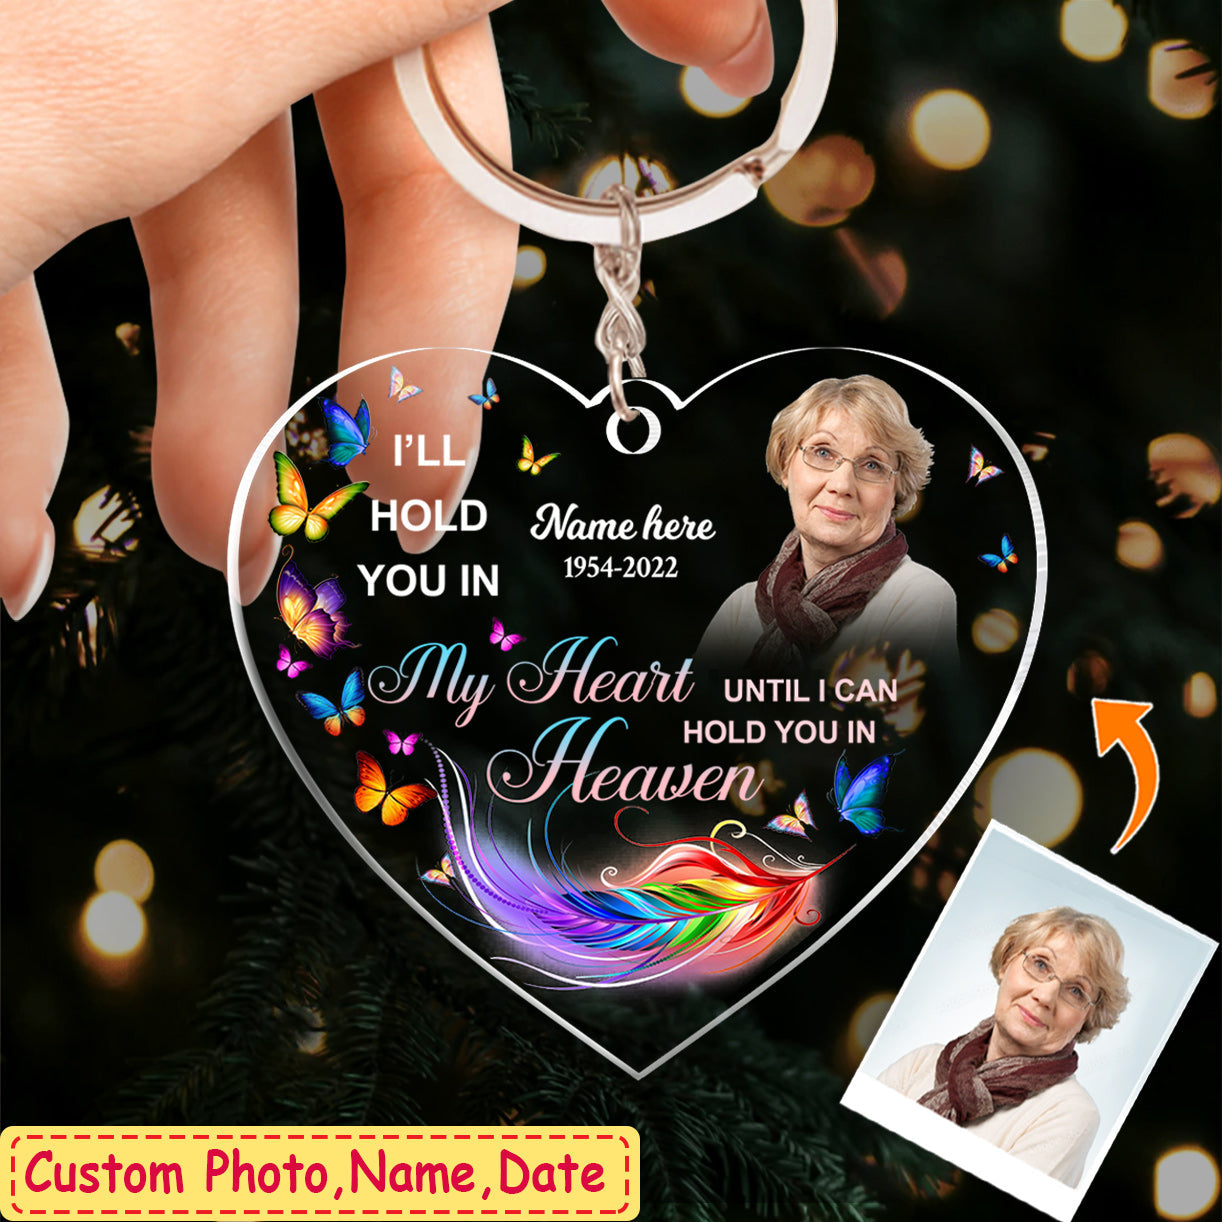 Personalized memorial upload photo acrylic keychain I'll hold you in my heart